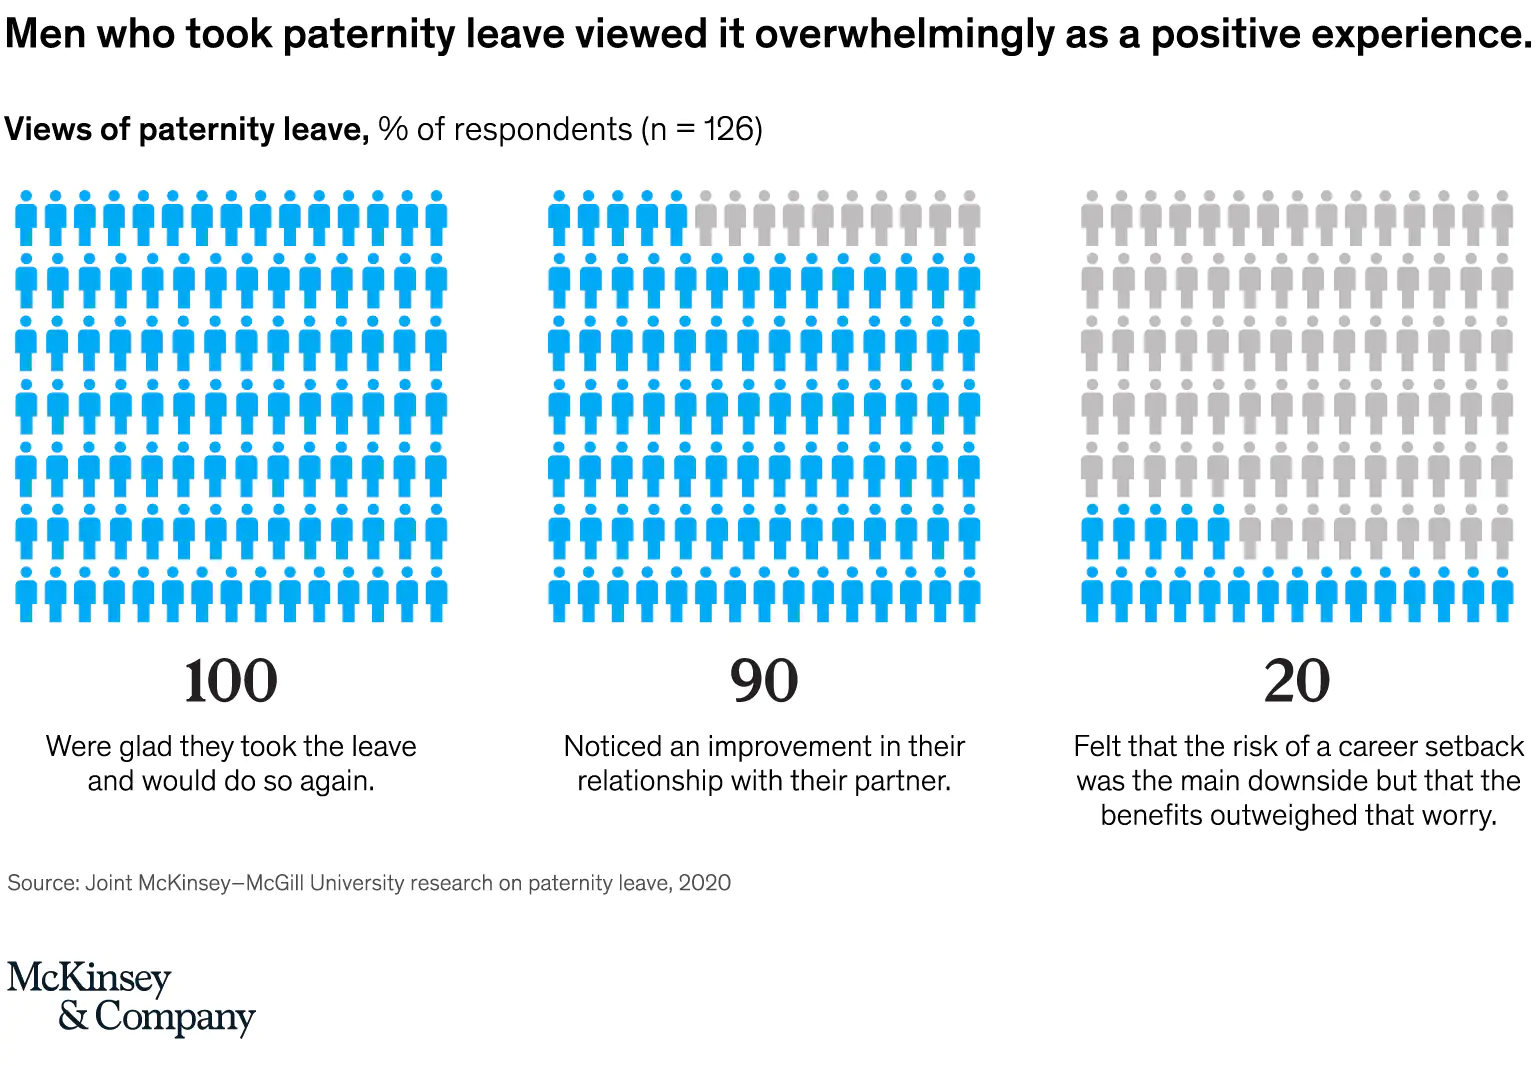 A McKinsey infographic. Paternity leave reaps massively positive benefits. 